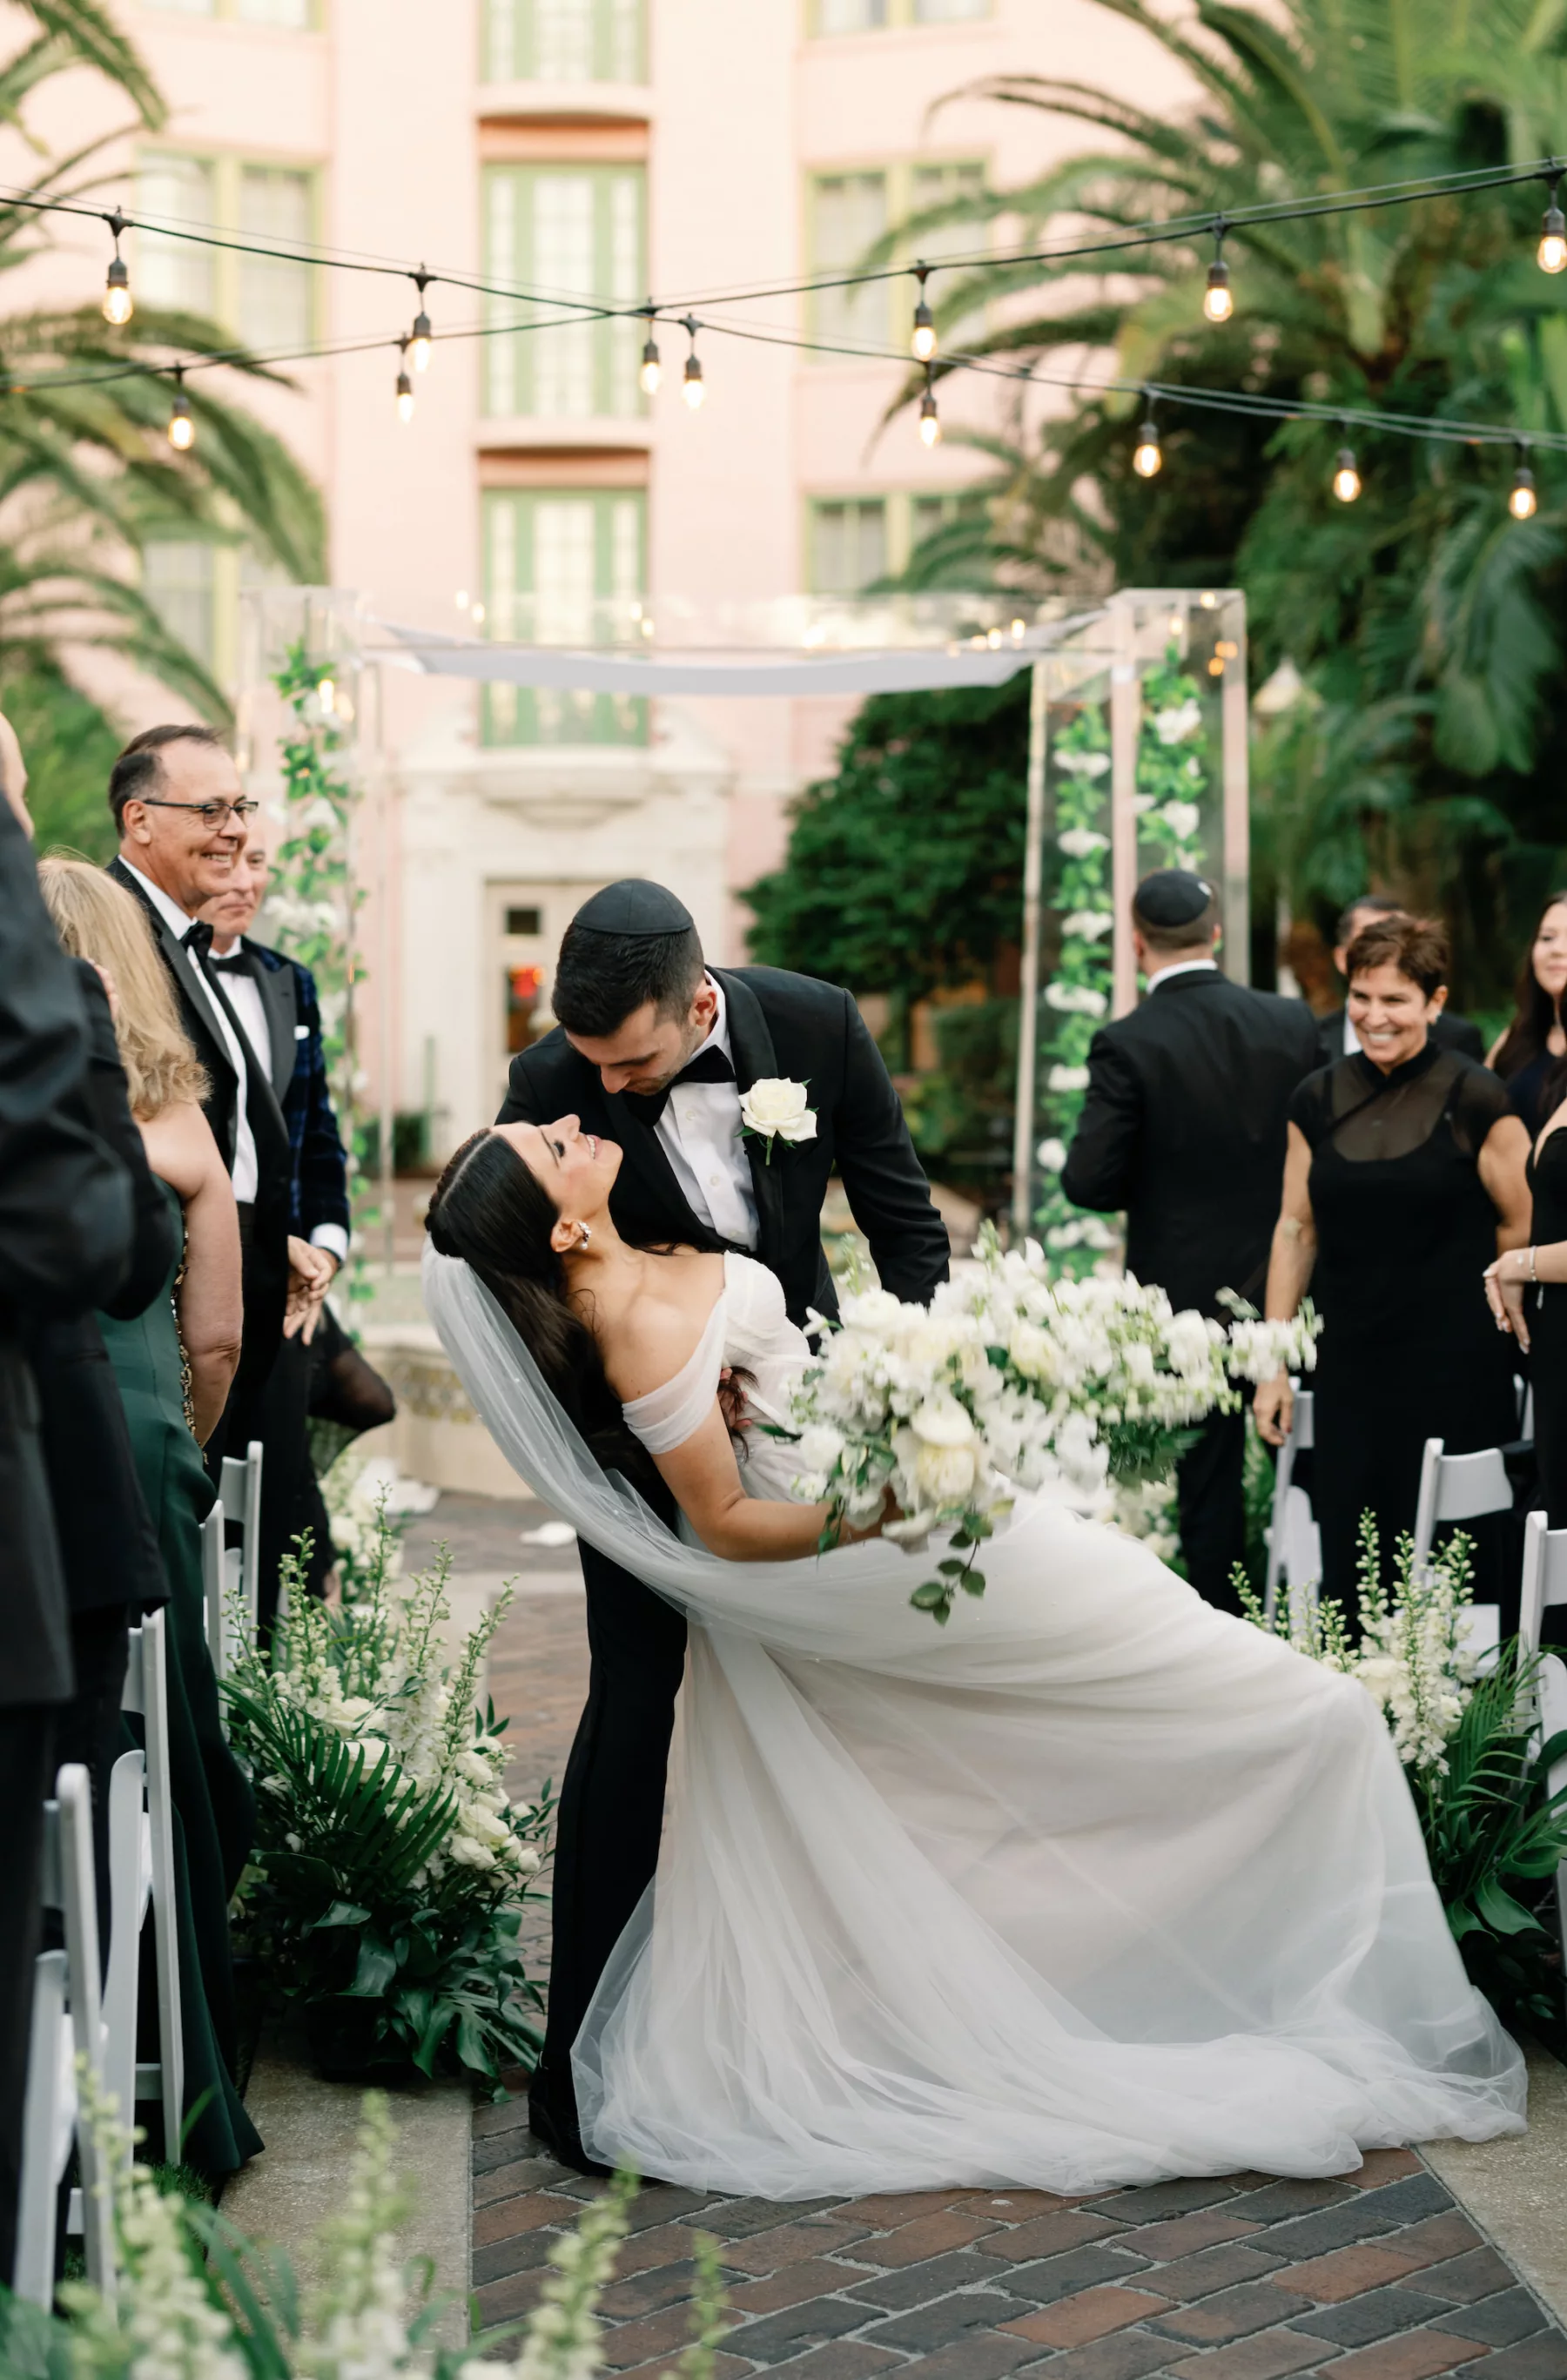 Bride and Groom Just Married Wedding Portrait | Tampa Bay Photographer Dewitt For Love | St Pete Content Creator Behind The Vows | Florist Botanica Design Studio | Event Venue The Vinoy